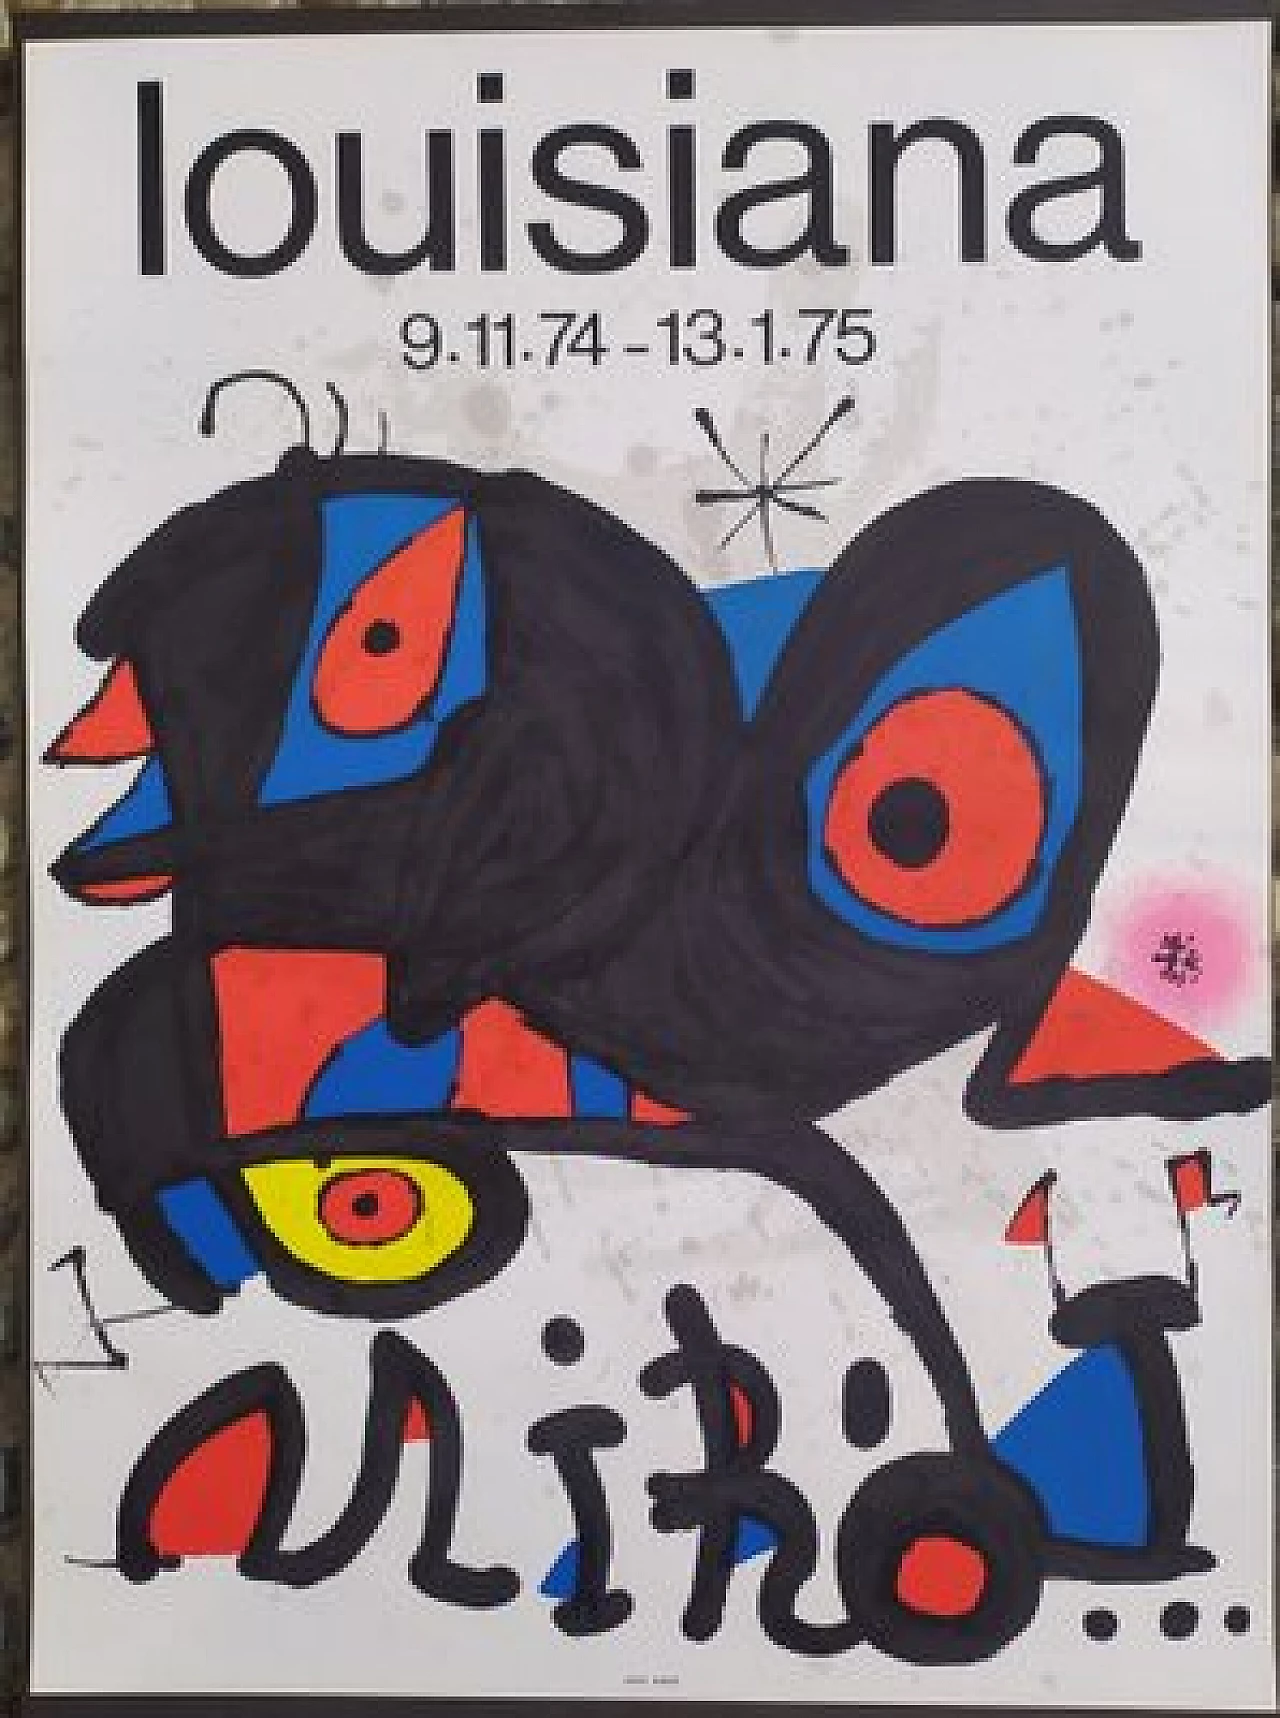 Joan Miró, poster for exhibition in Copenhagen, lithography, 1974 1